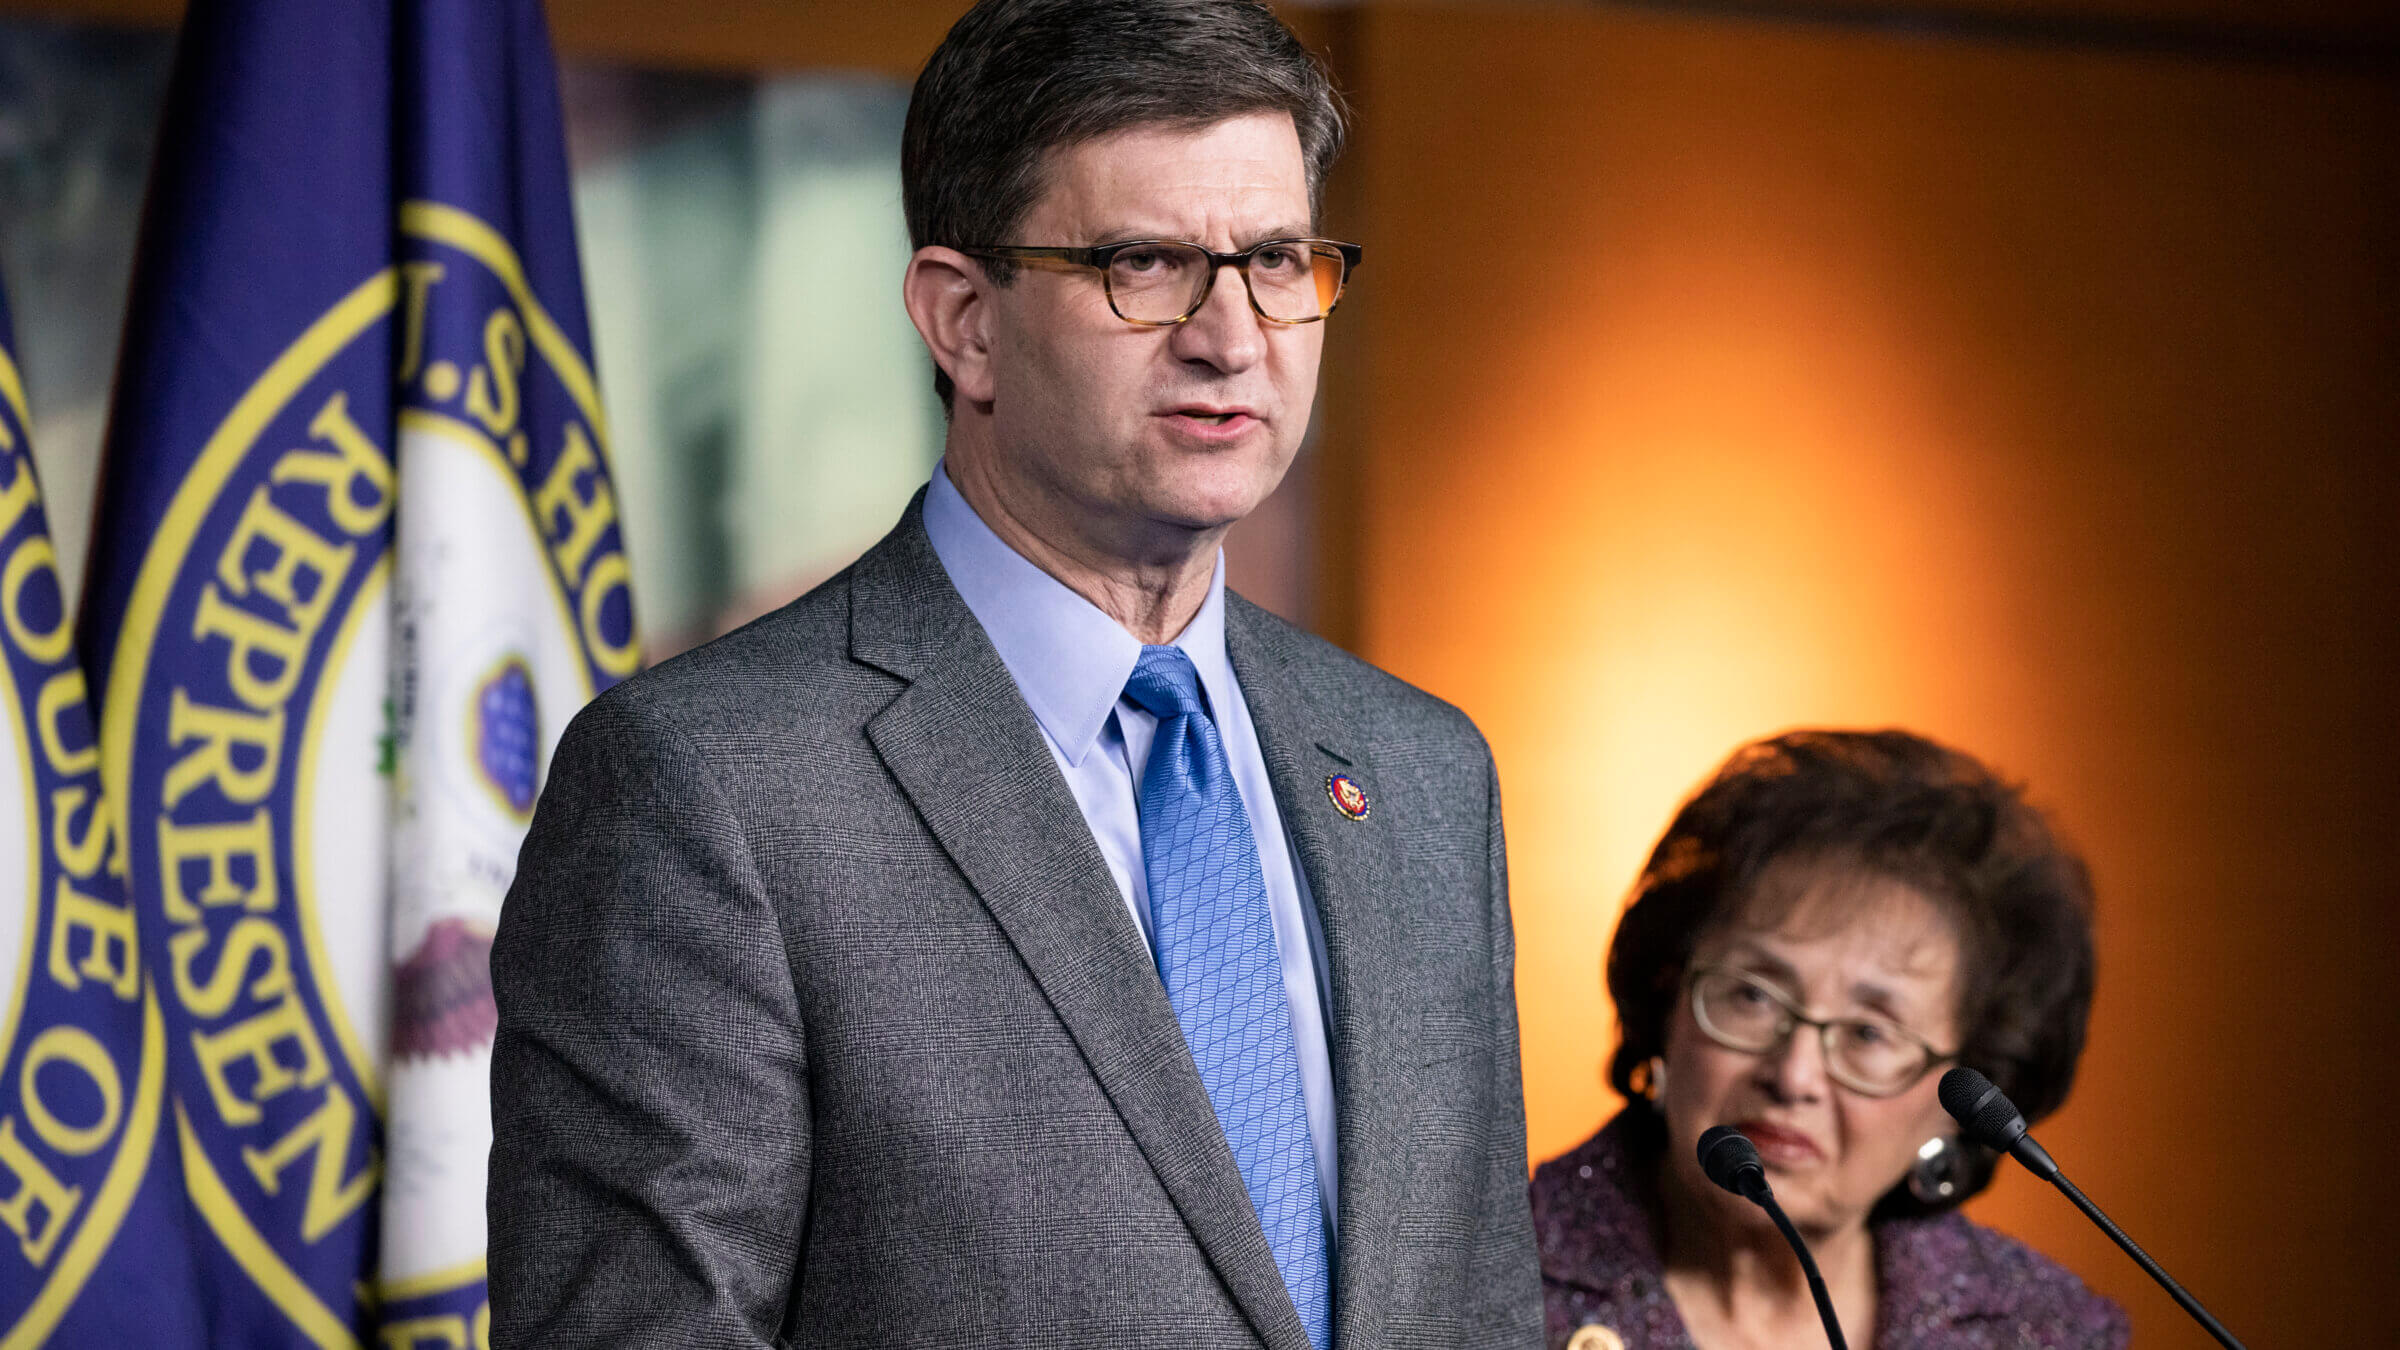 Rep. Brad Schneider (D-IL) speaks about his experiences during a trip to Israel and Auschwitz-Birkenau as part of a bipartisan delegation on Jan. 28, 2020. 